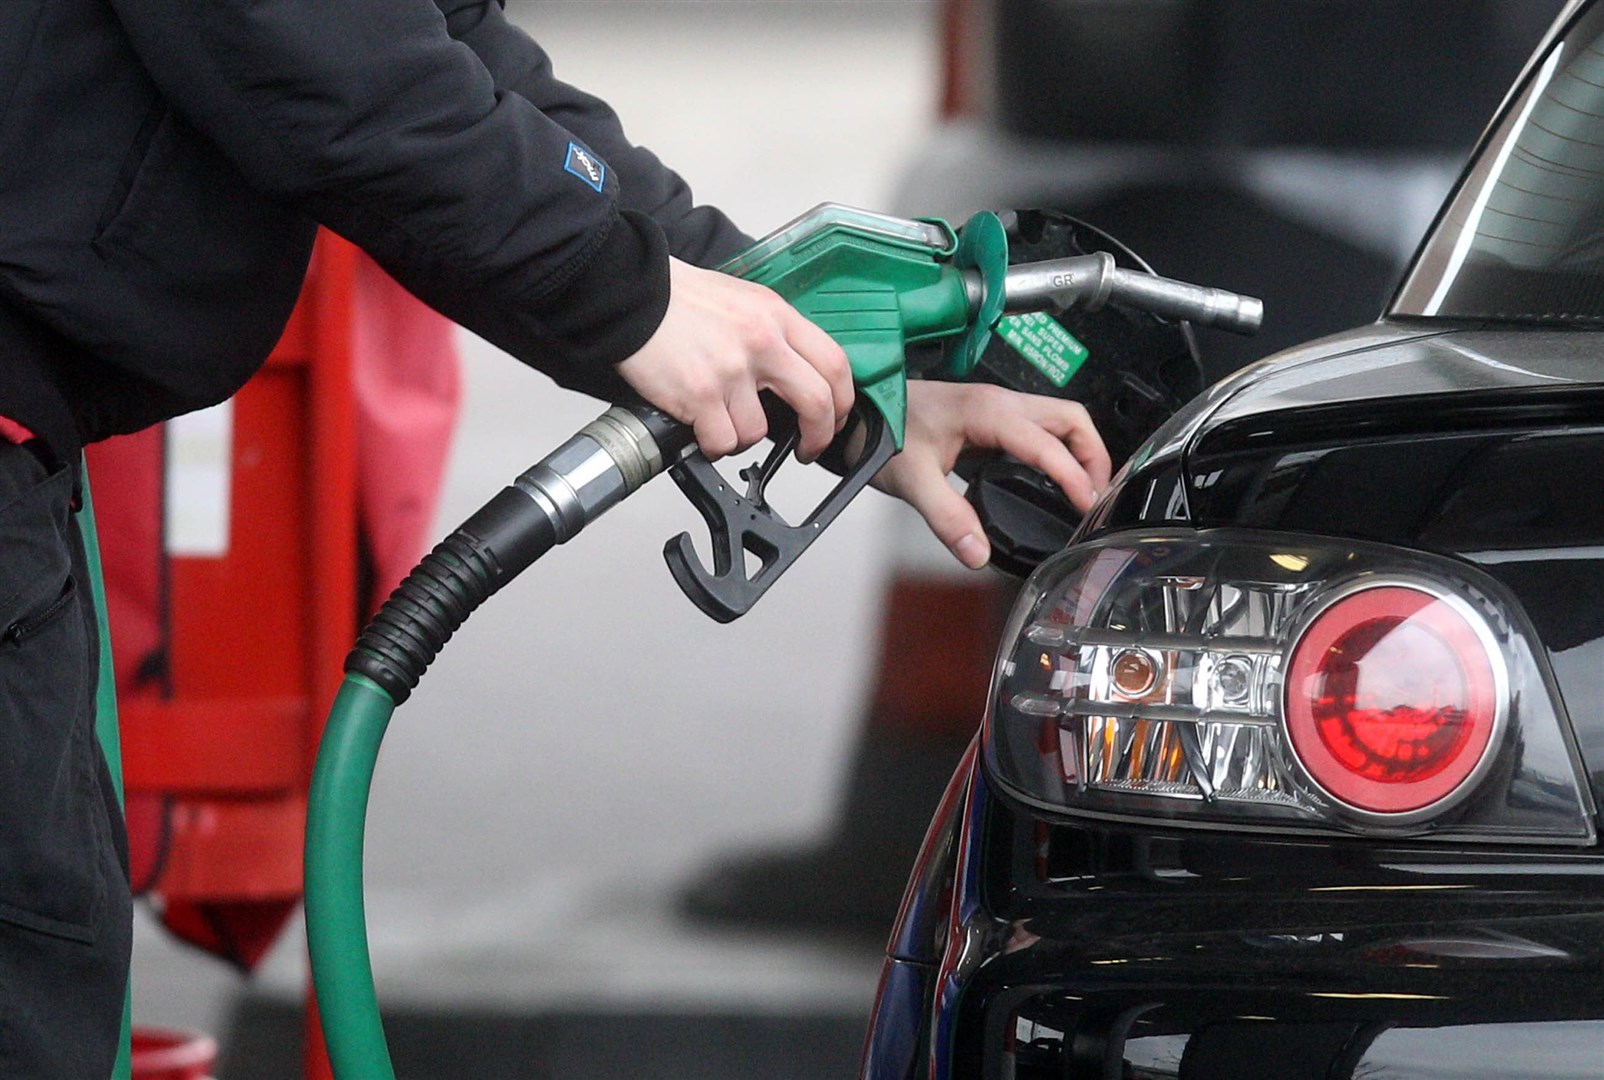 Fuel prices have reached record highs in recent weeks amid a rise in oil prices following Russia’s invasion of Ukraine (PA)